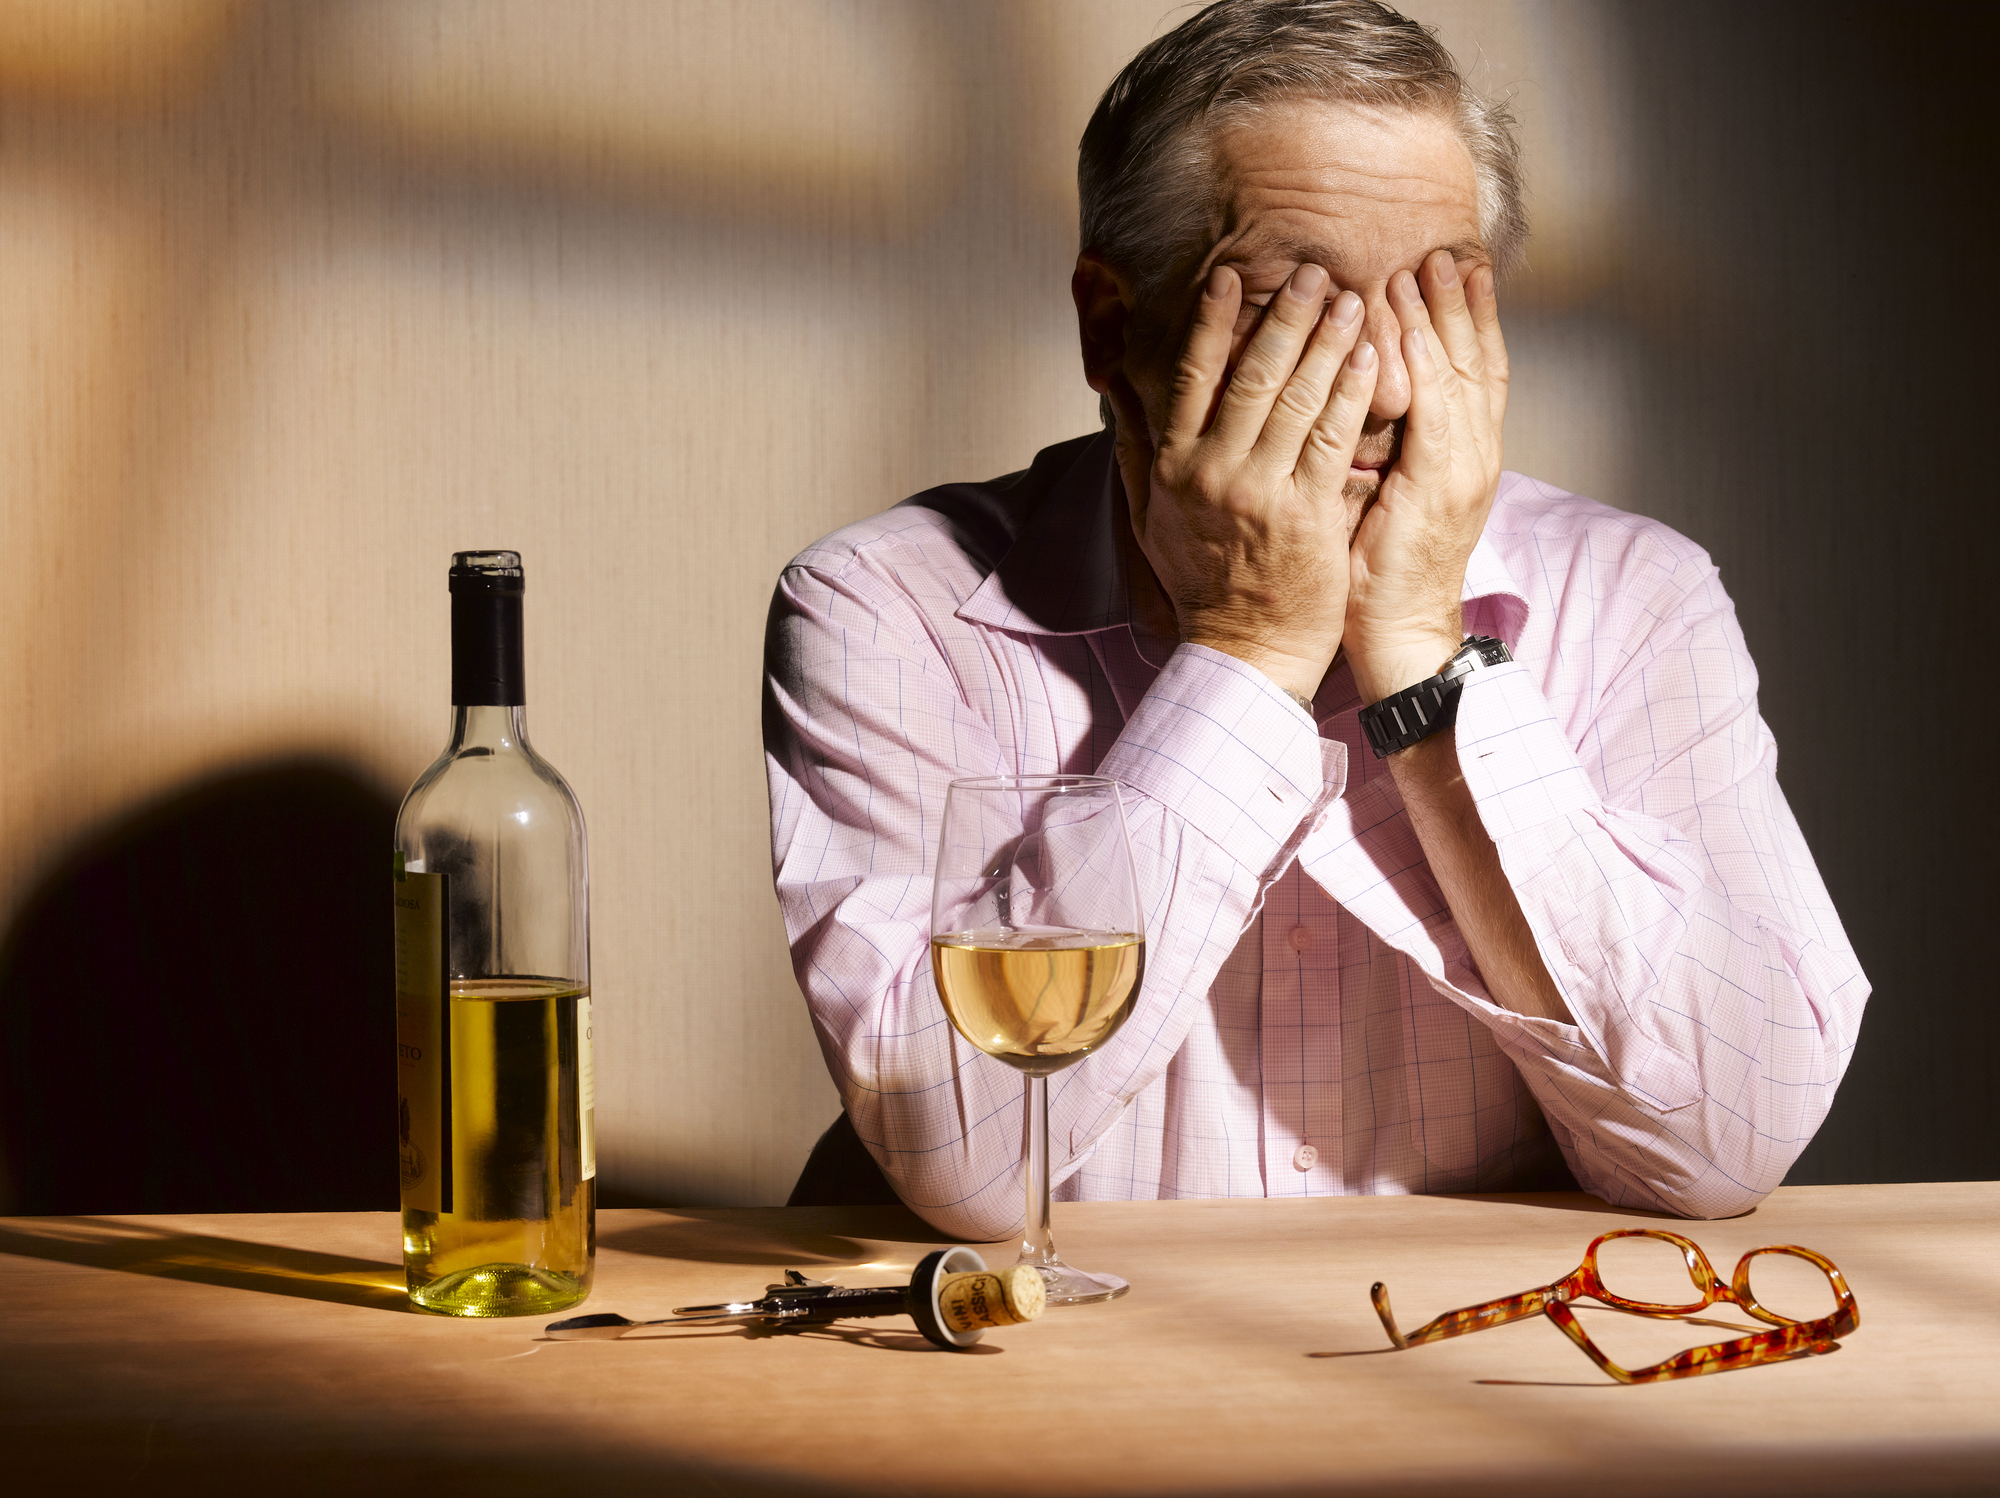 A man covering his face as a glass and bottle of wine sit on the table in front of him